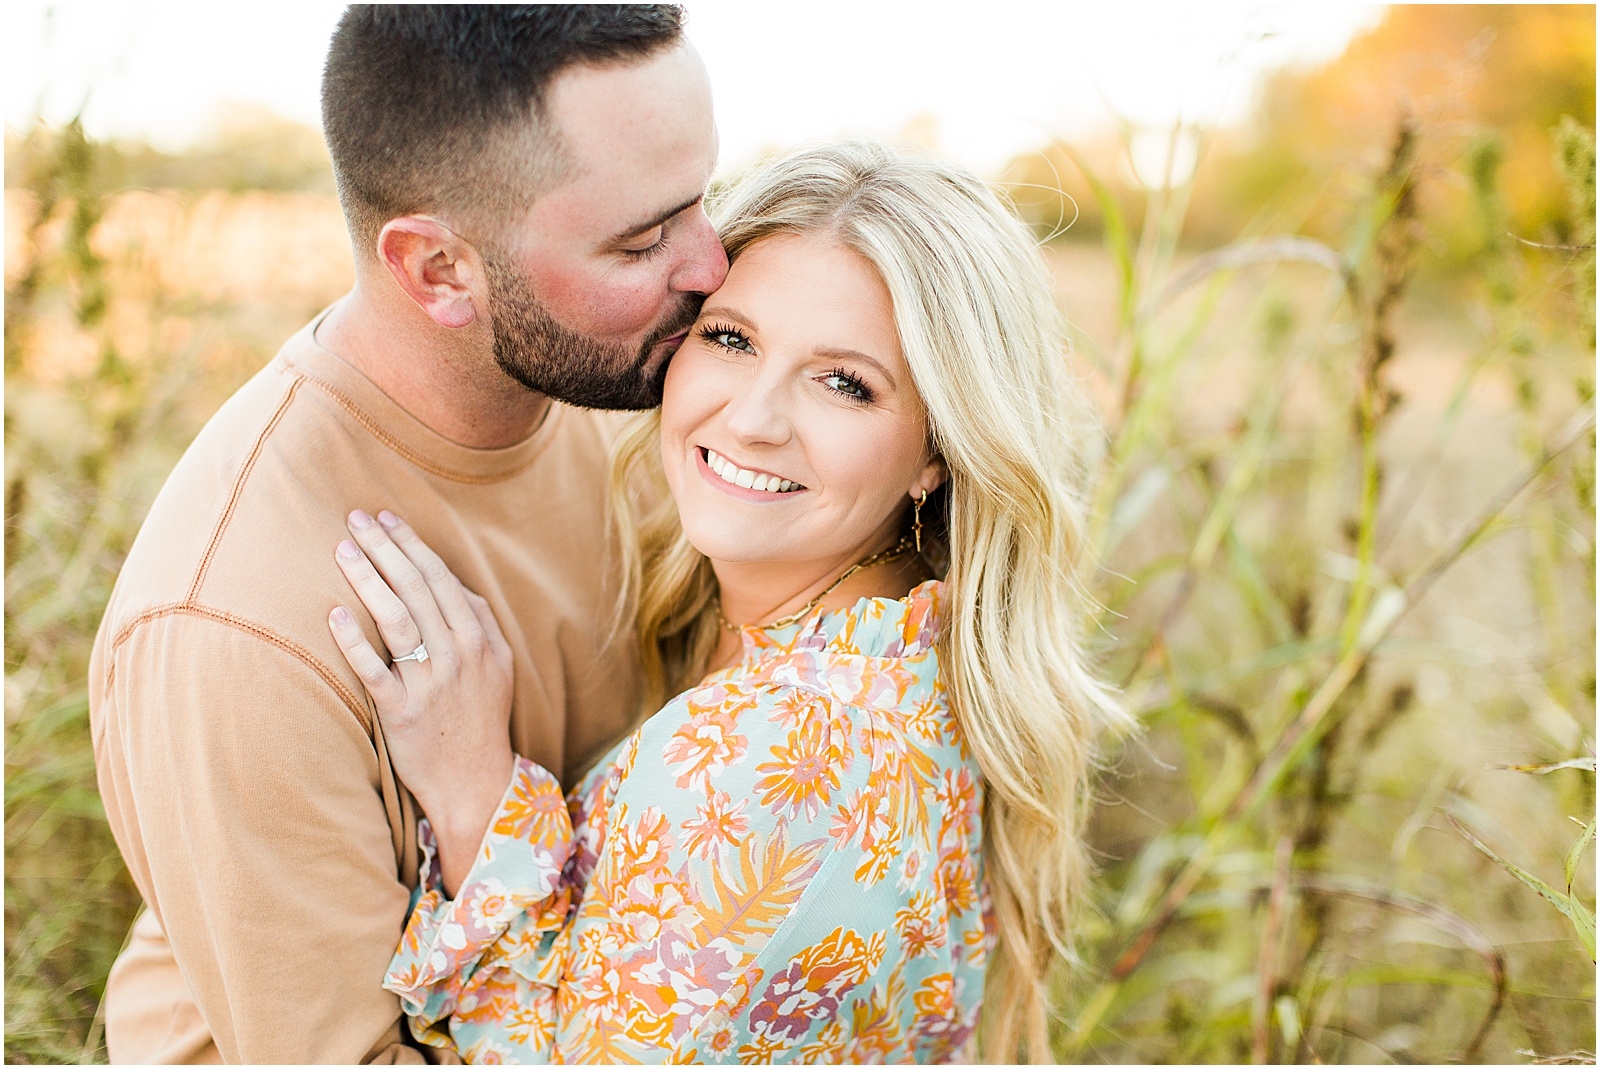 A Southern Indiana Engagement Session | Charleston and Erin | Bret and Brandie Photography017.jpg